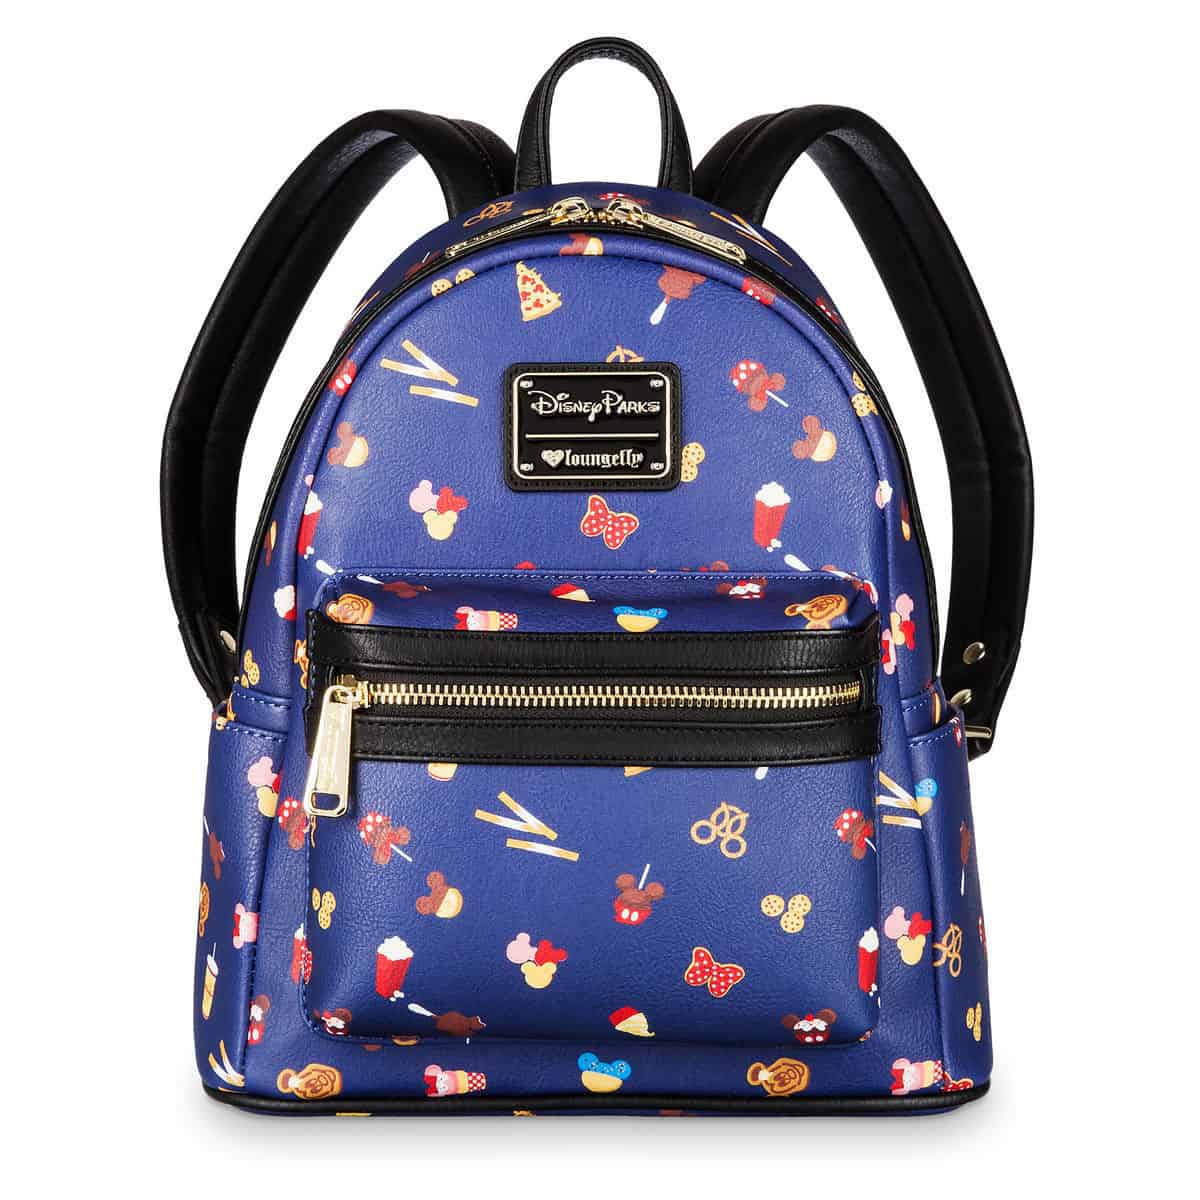 Disney Parks Food Icons Mini Backpack by Loungefly